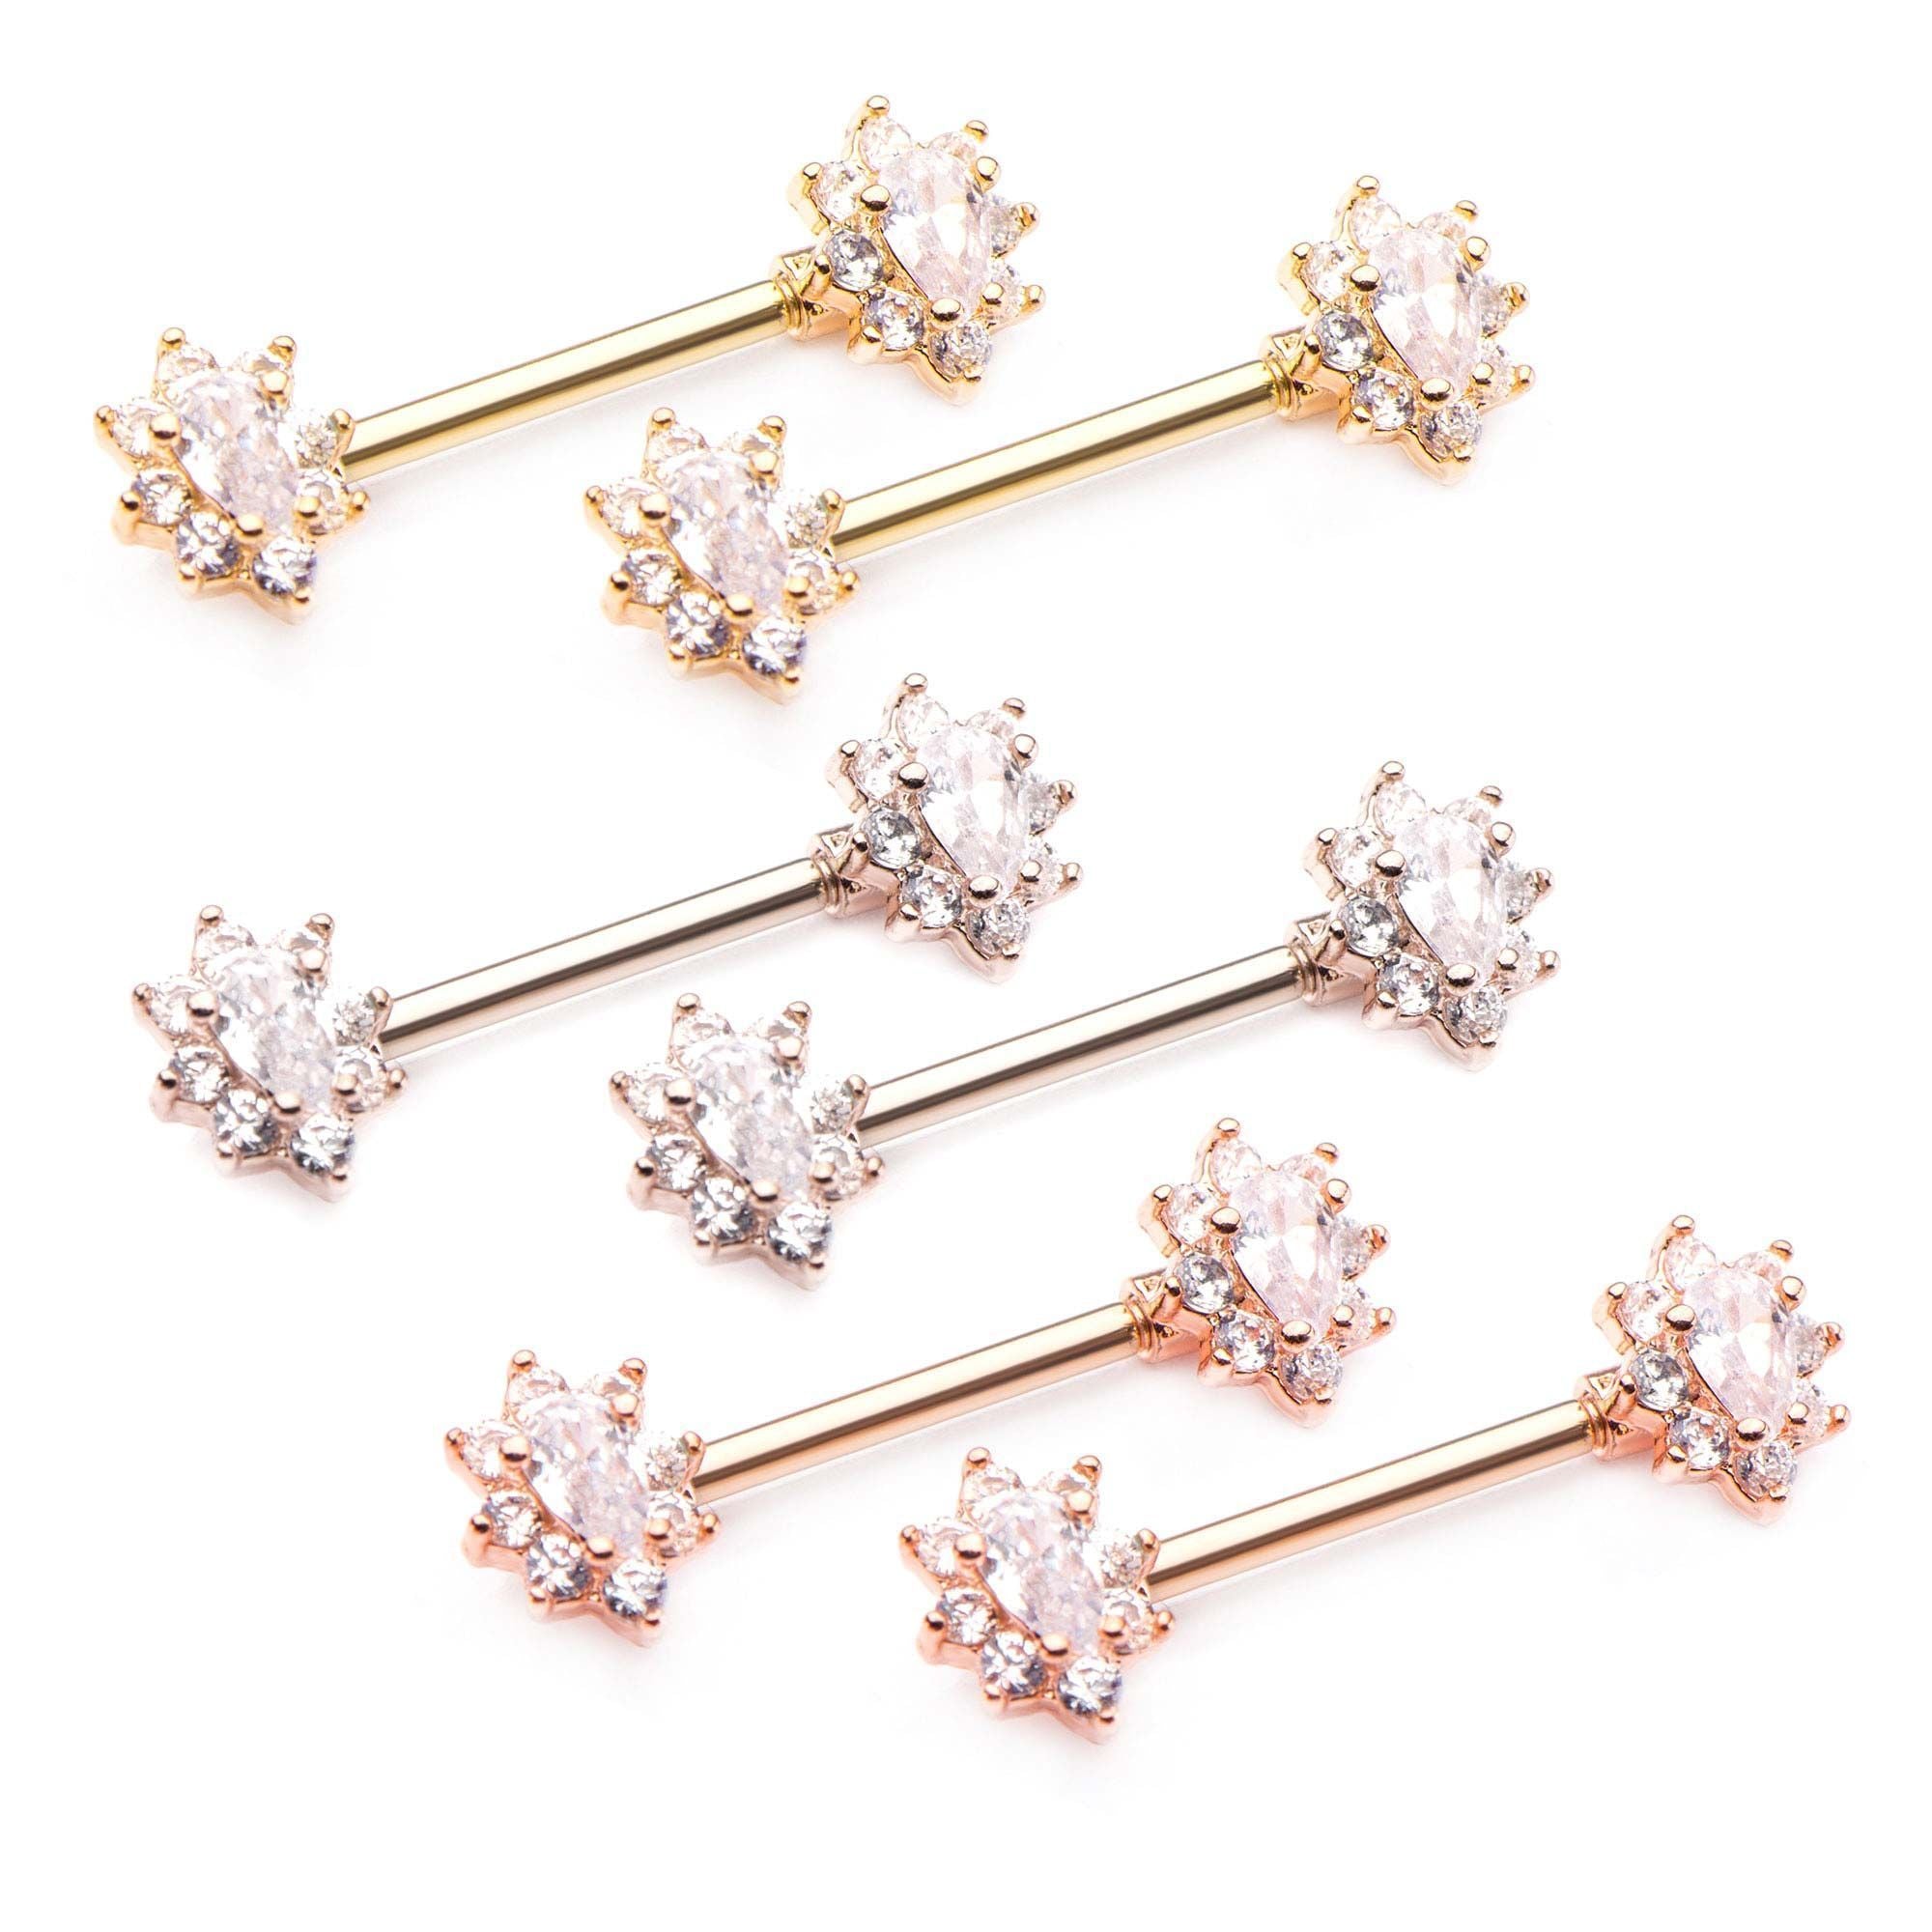 14g 9/16 Forward Facing Oval Cluster Clear CZ Nipple Barbells w/ 8.9mm ends. - 1 Pair sbvnp45713